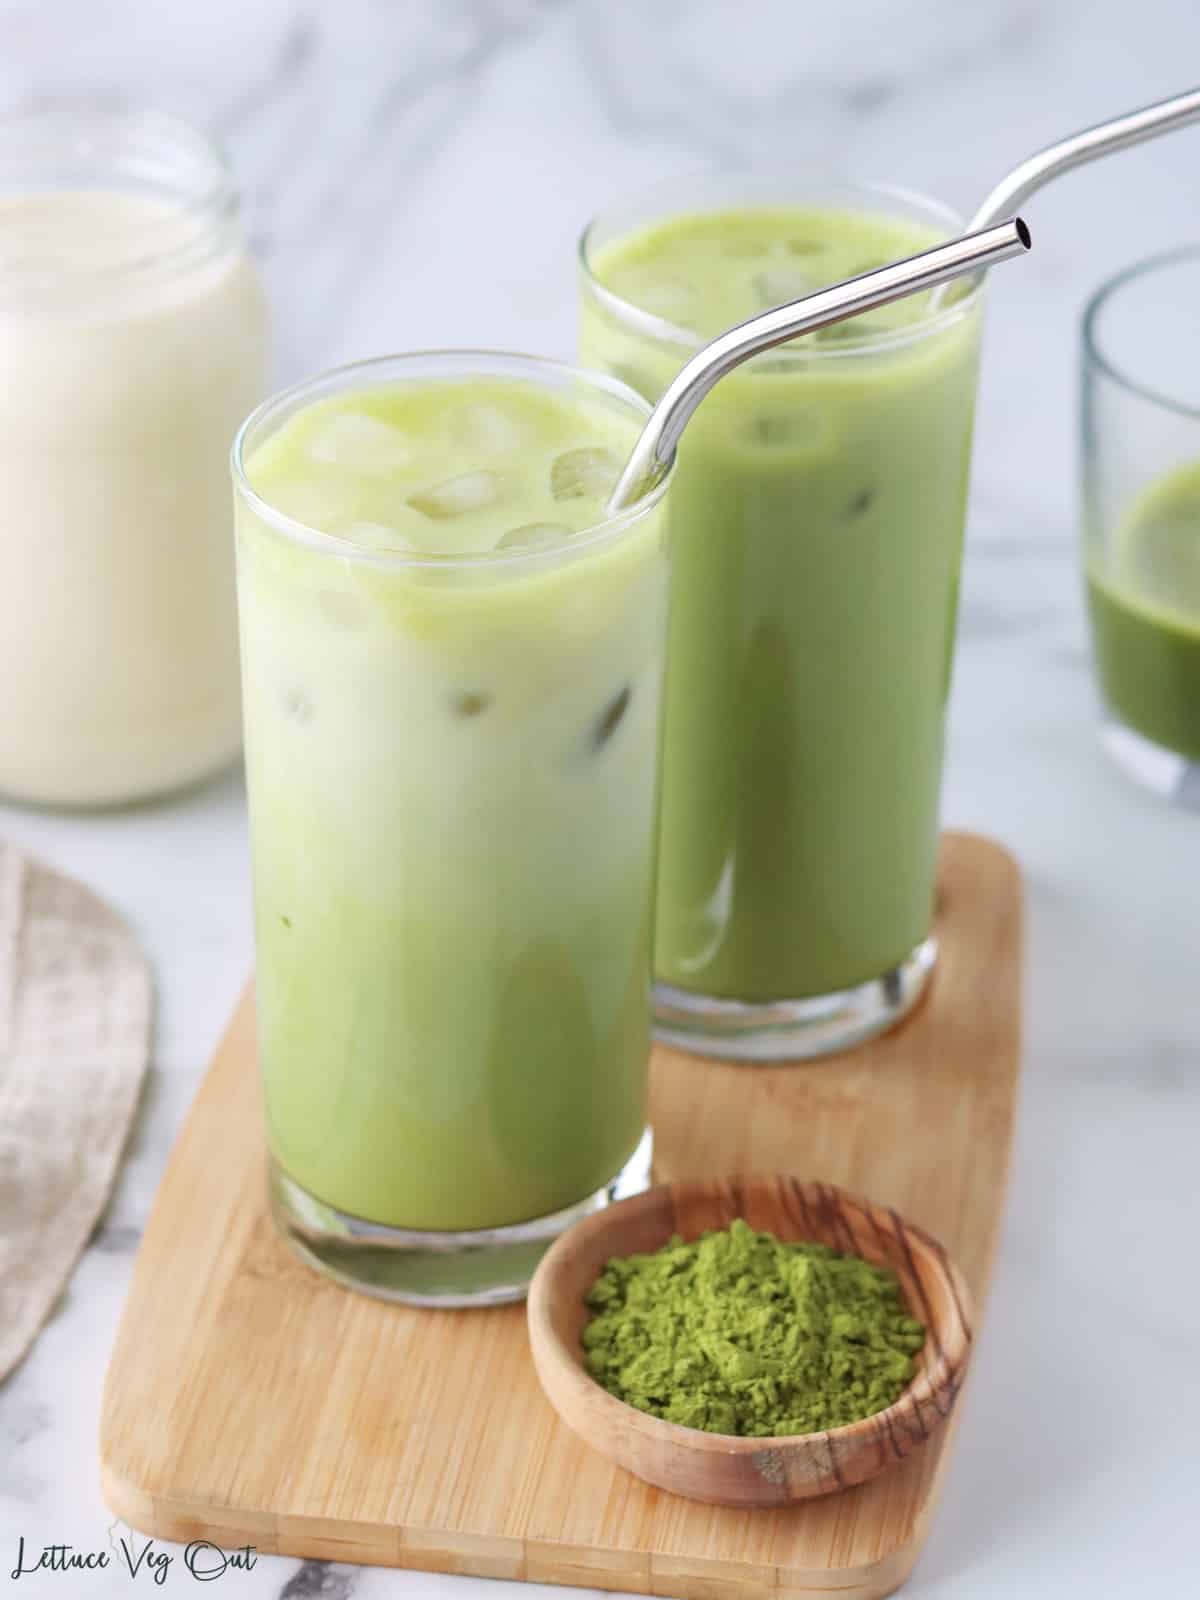 Two tall glasses of iced matcha latte on wood board with small bowl of matcha powder.